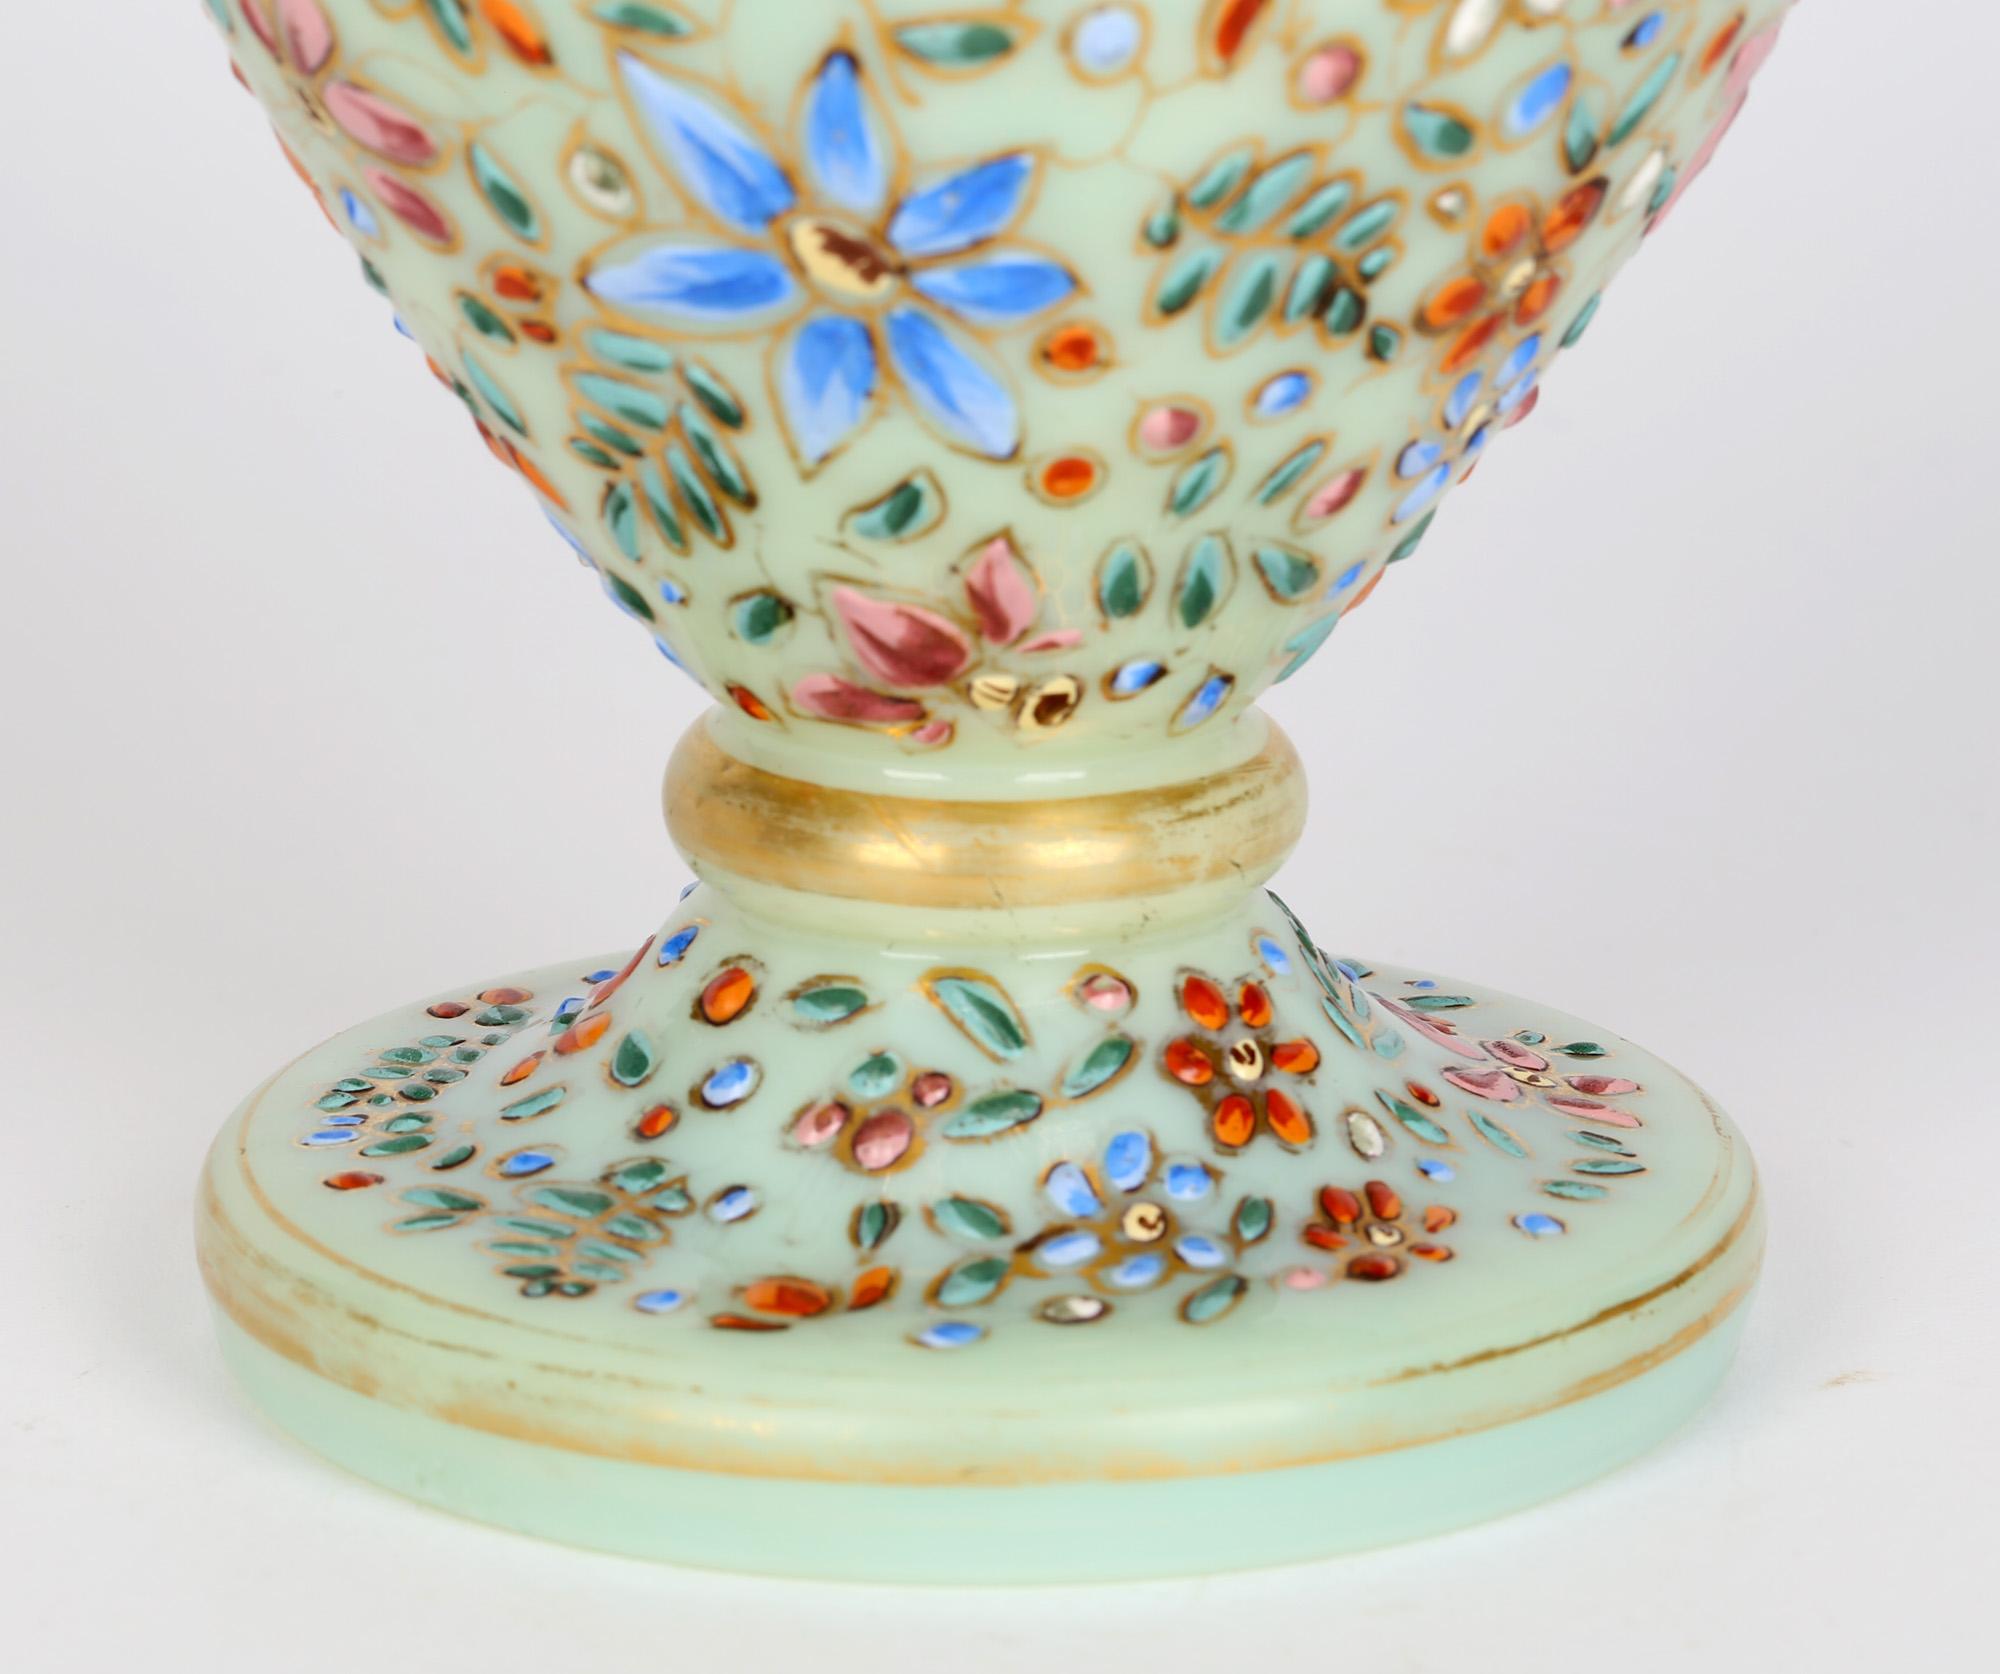 A stunning green opalescent hand blown glass vase exquisitely decorated in colored enamels with a snake amidst floral and leaf designs attributed to Moser and dating from the latter 19th century. This finely made vase stands on a rounded pedestal